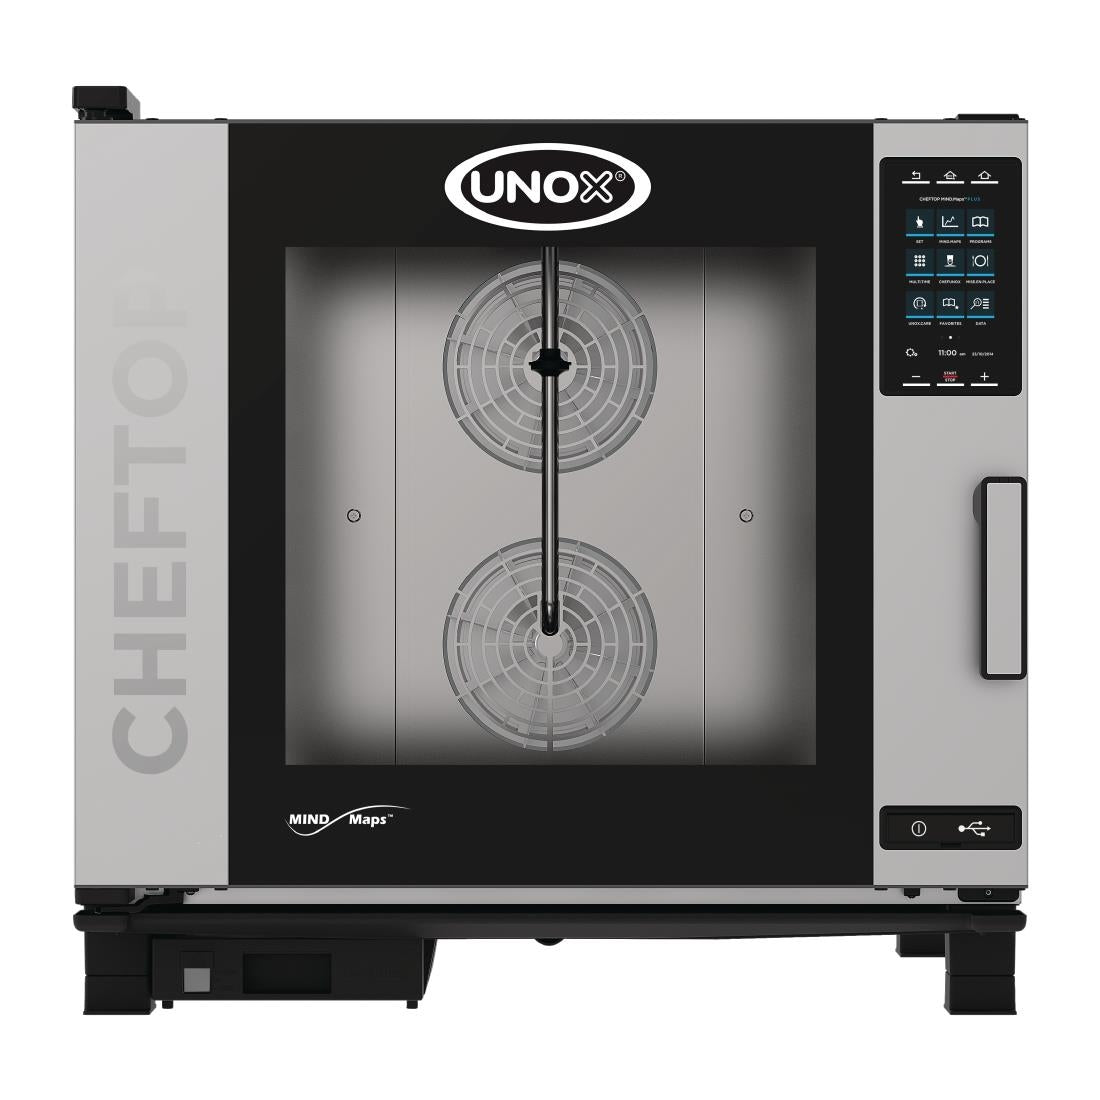 Unox Cheftop MIND Maps Plus Combi Oven 6xGN 2/1 with Install